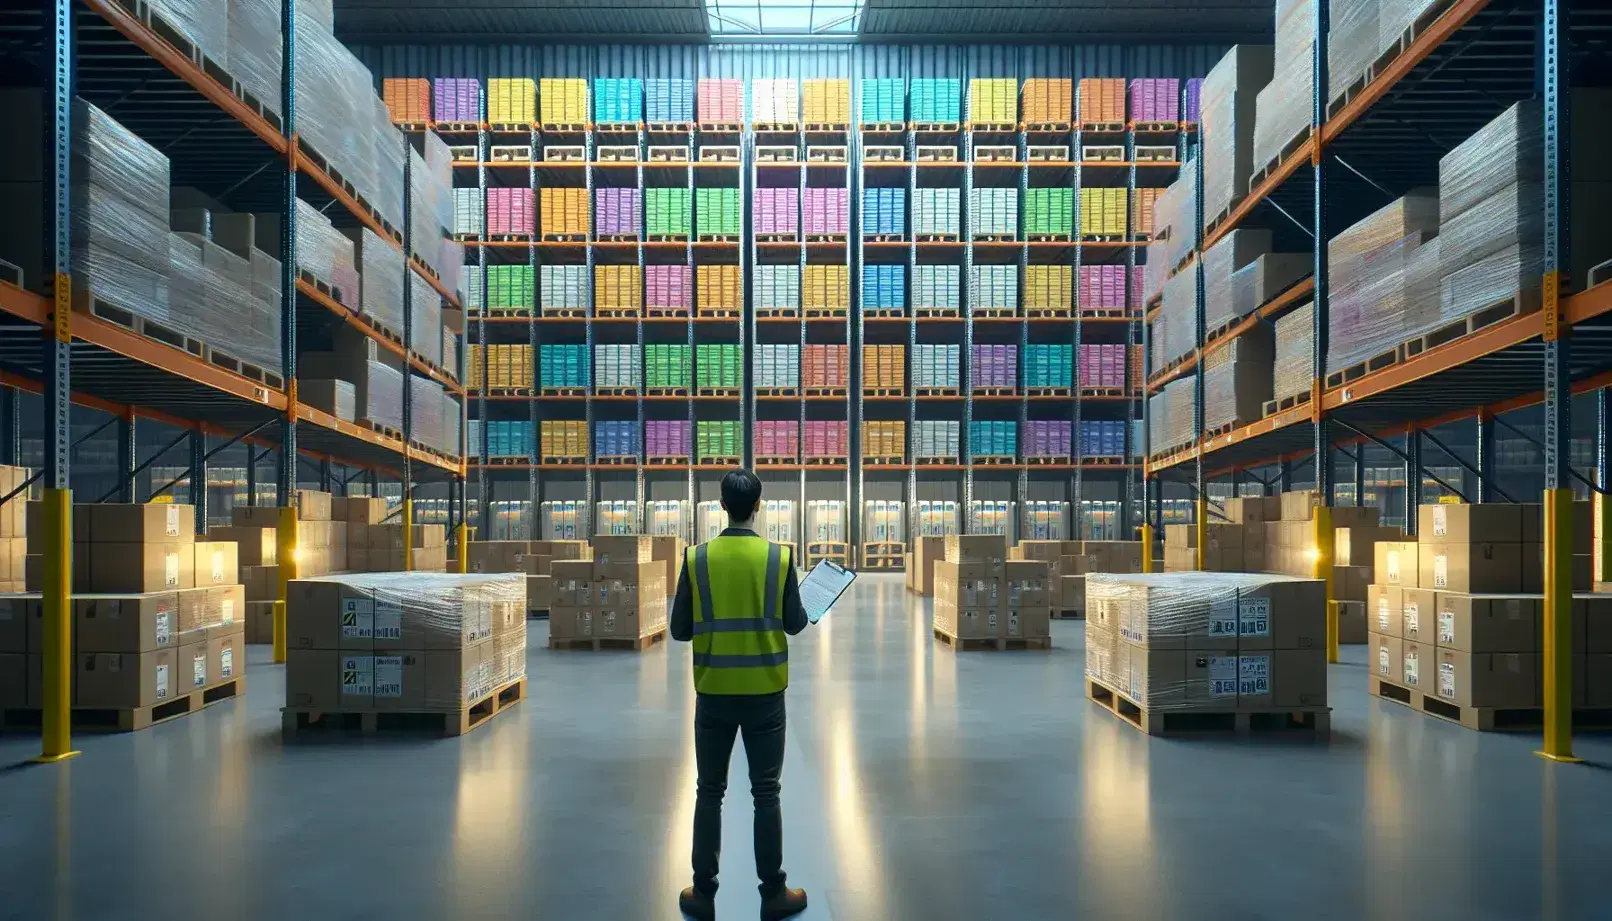 Warehouse interior with organized shelves, color-coded boxes, worker with clipboard, forklift by loading bay, and pallets of goods on the floor.